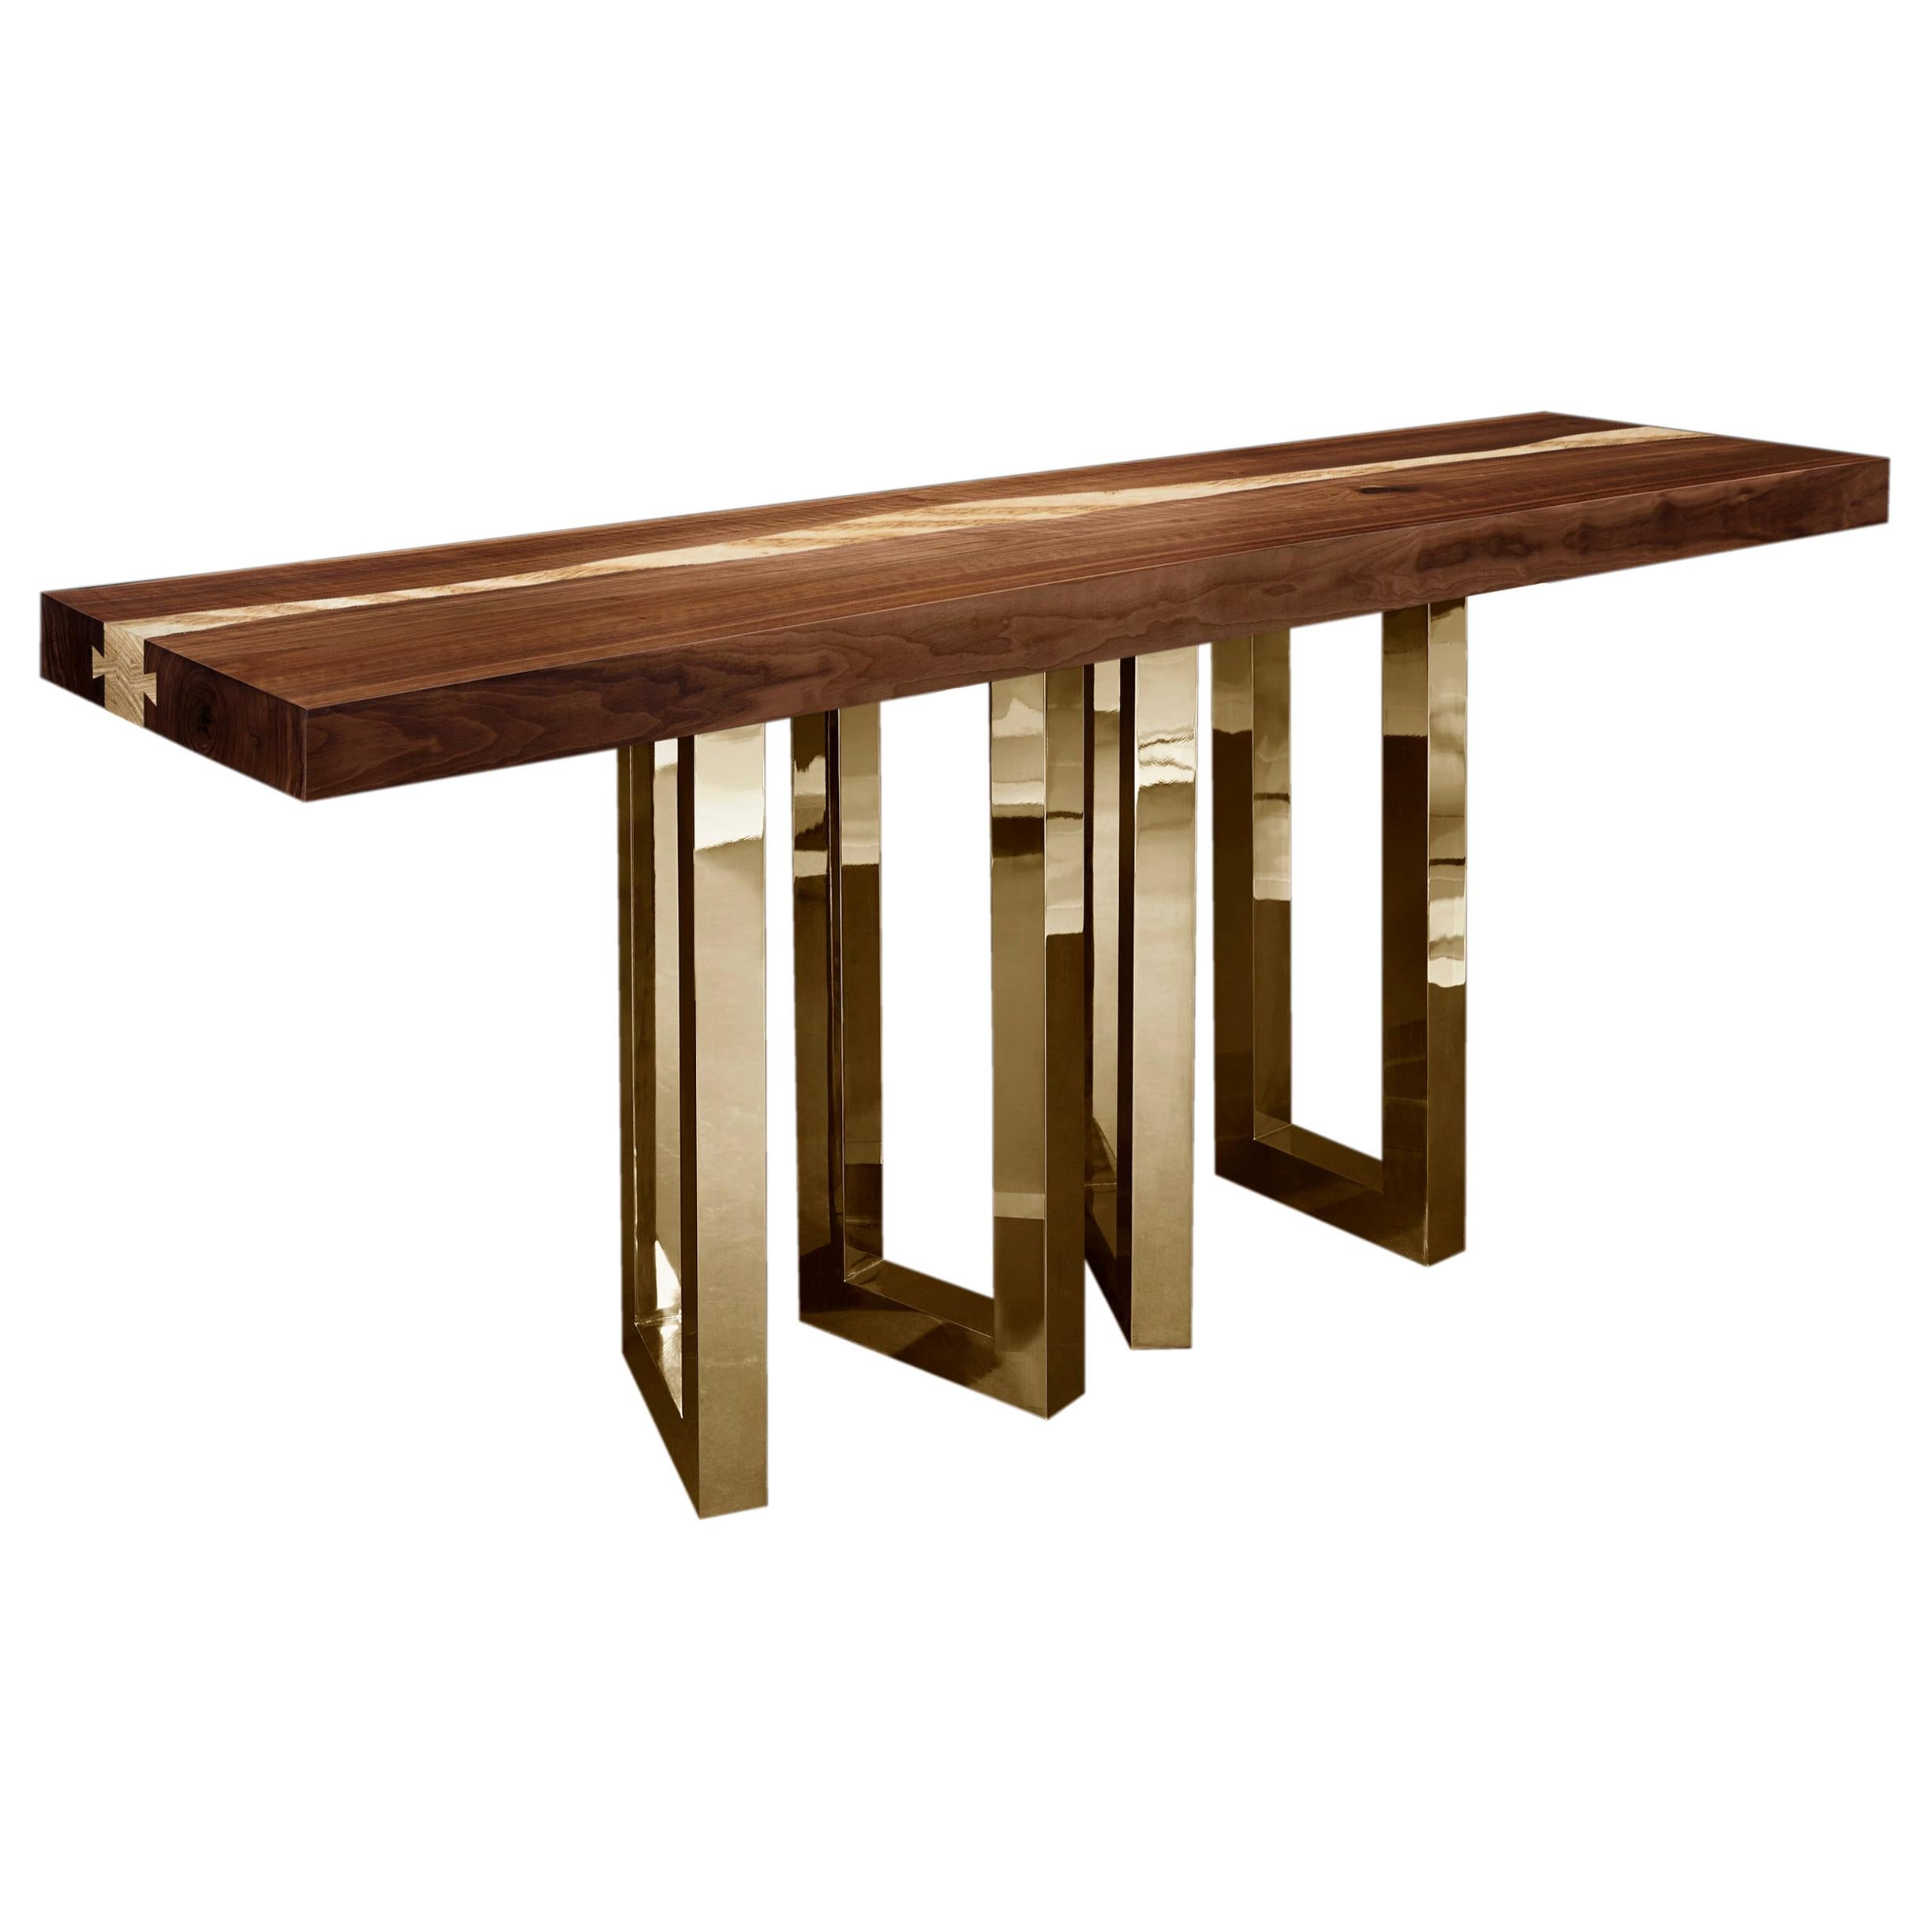 "Il Pezzo 6 Console" table in solid walnut and ash top - polished brass base